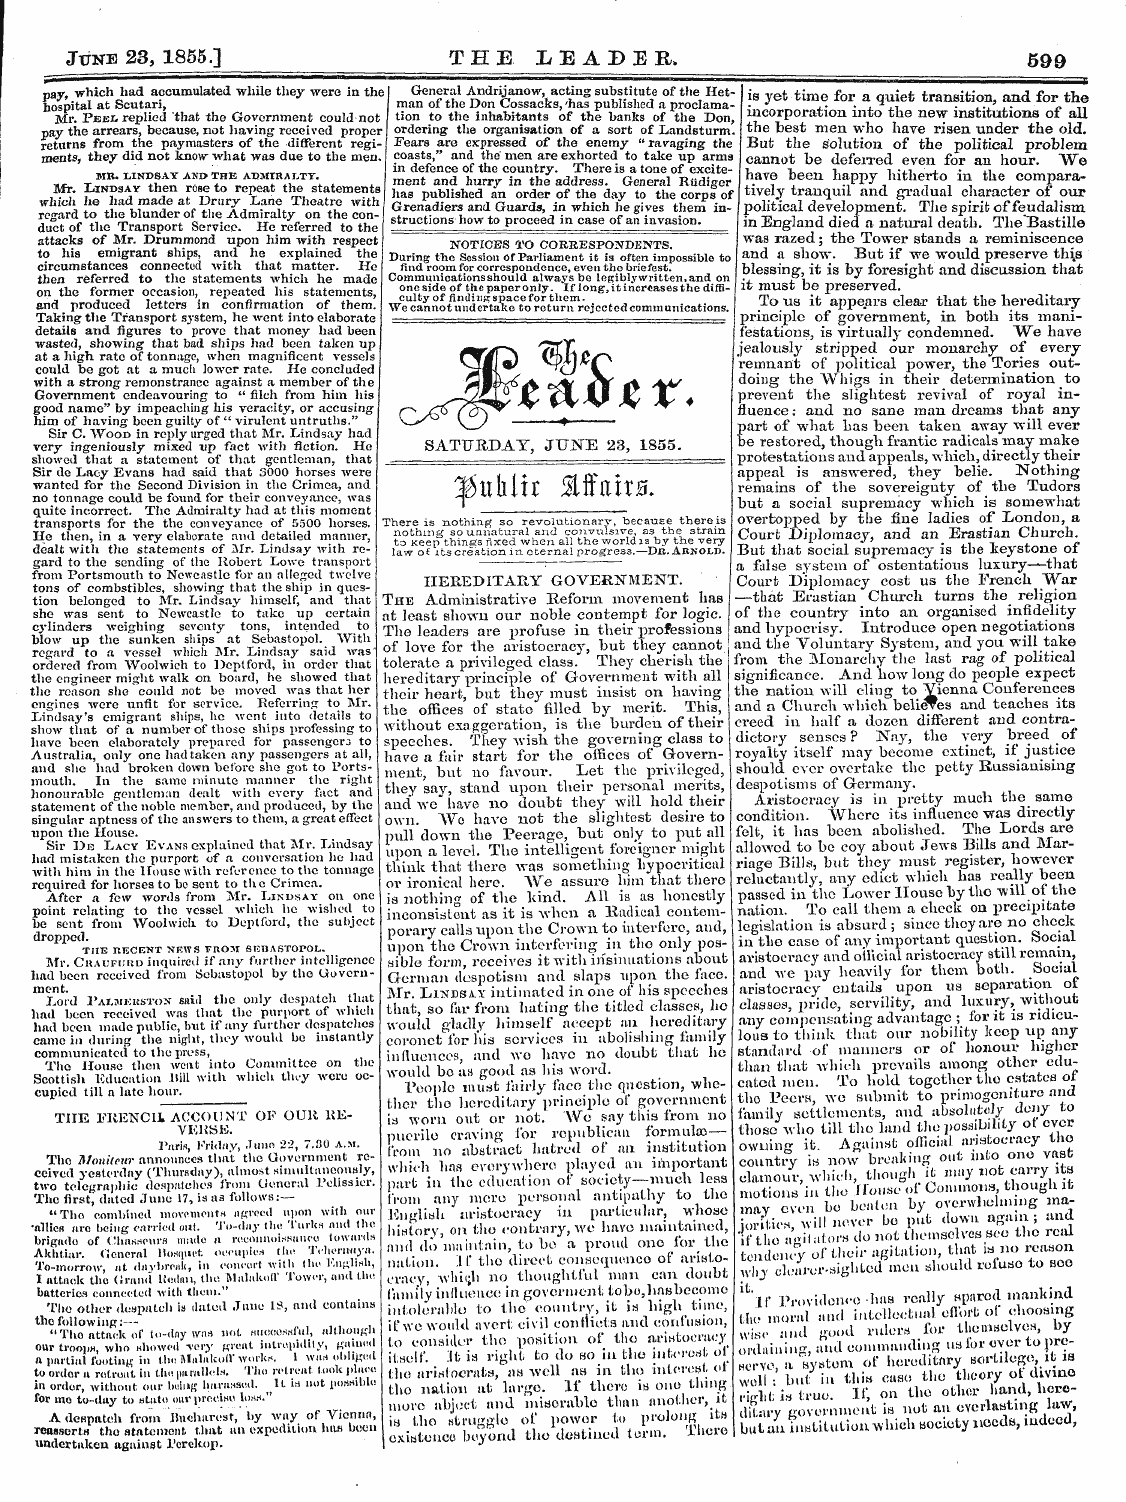 Leader (1850-1860): jS F Y, 2nd edition - Saturday , June 23, 1855.